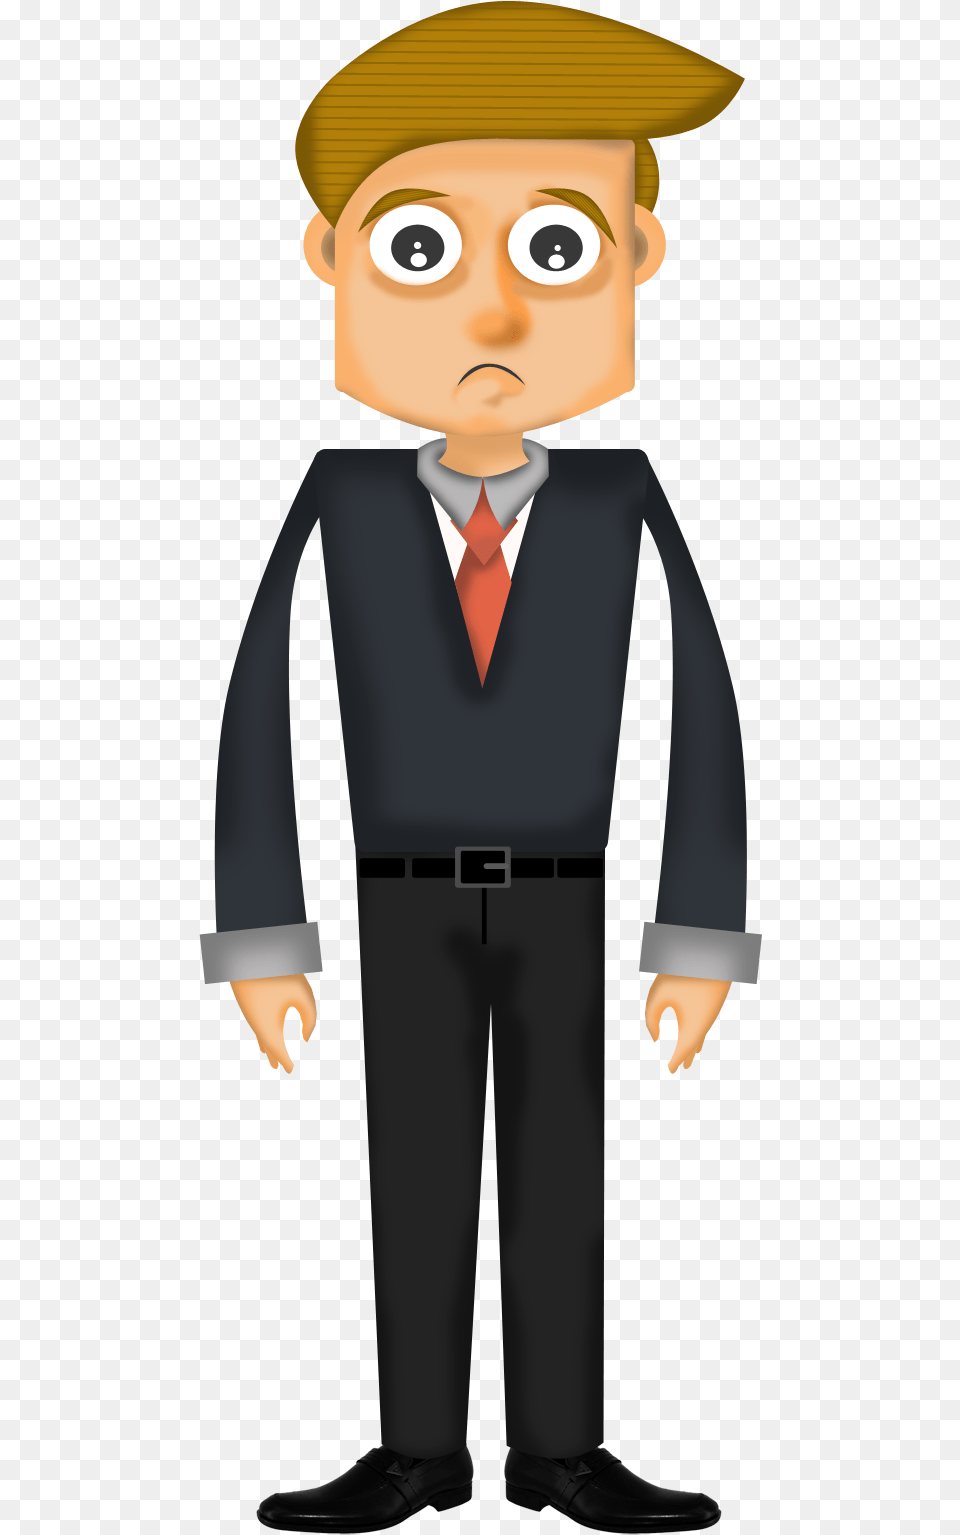 View Larger Cartoon, Accessories, Suit, Tie, Formal Wear Png Image